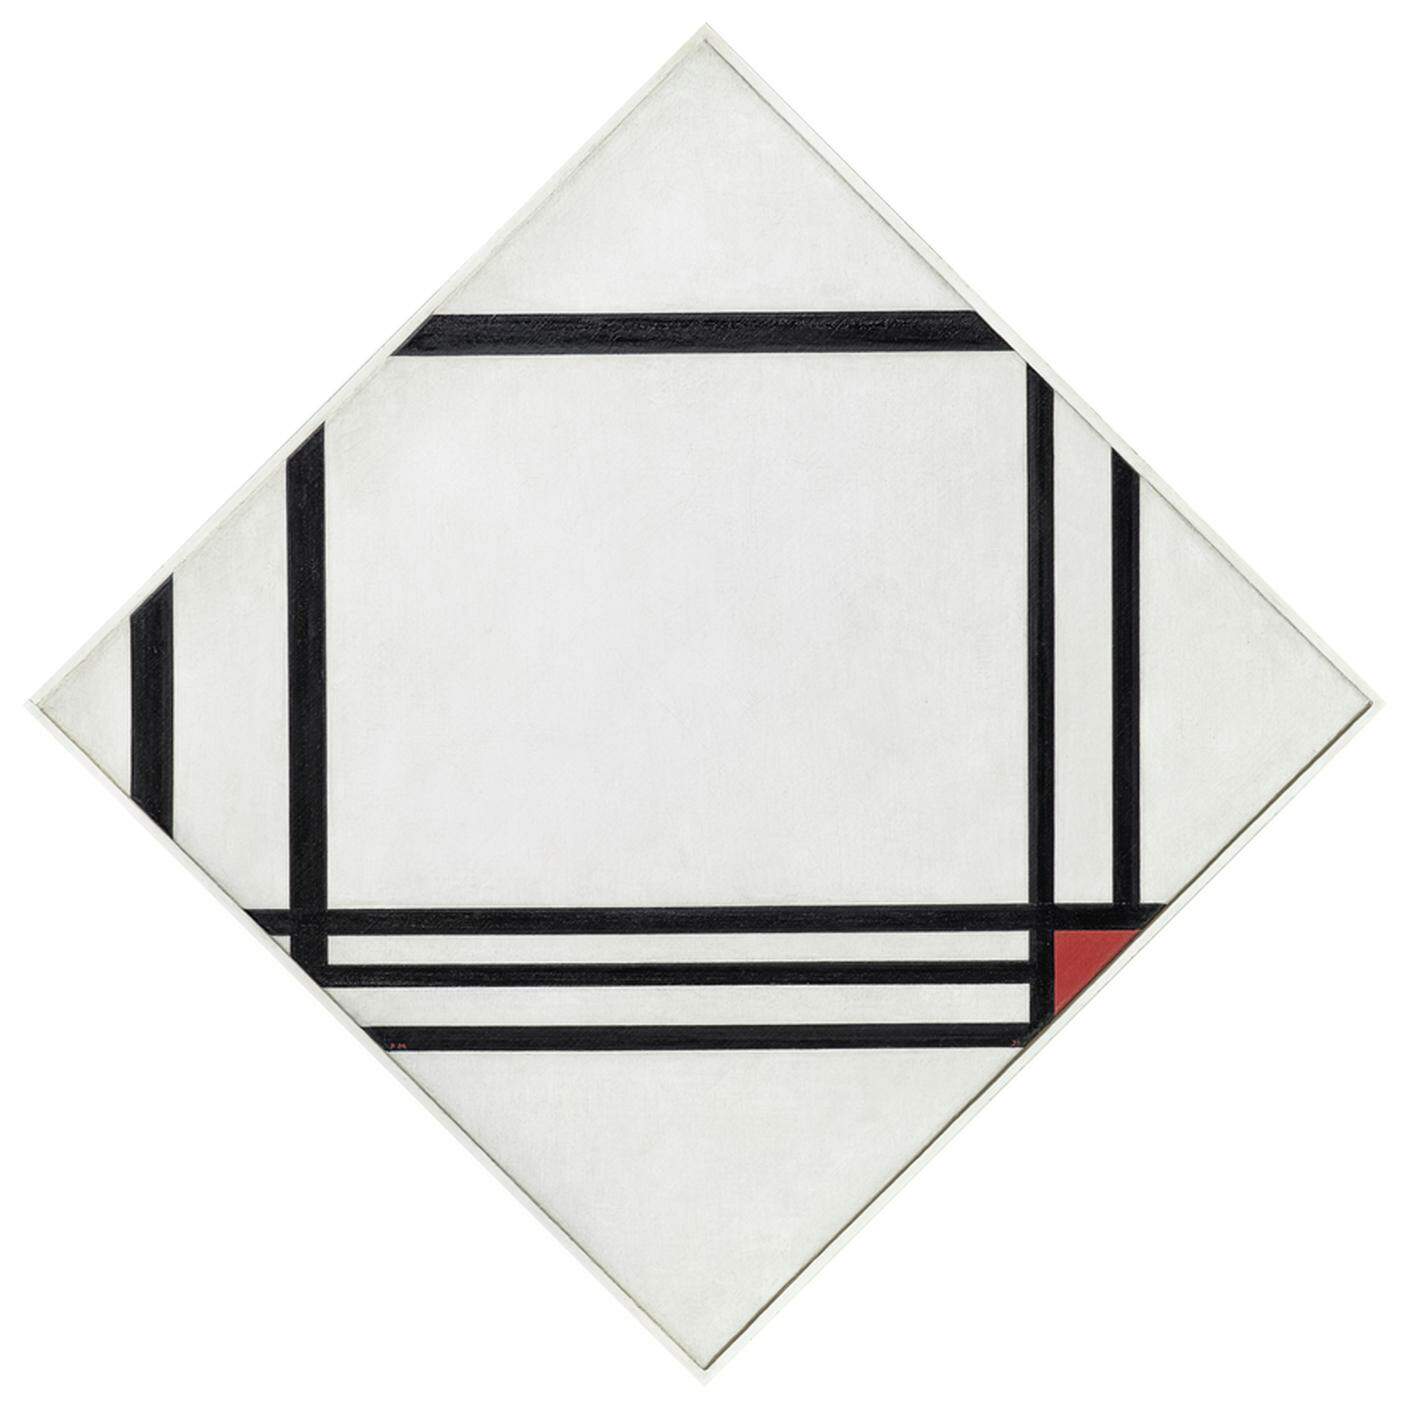 Piet Mondrian, Lozenge Composition with Eight Lines and Red - Picture No. III, 1938. Fondation Beyeler, Riehen-Basel, Beyeler Collection